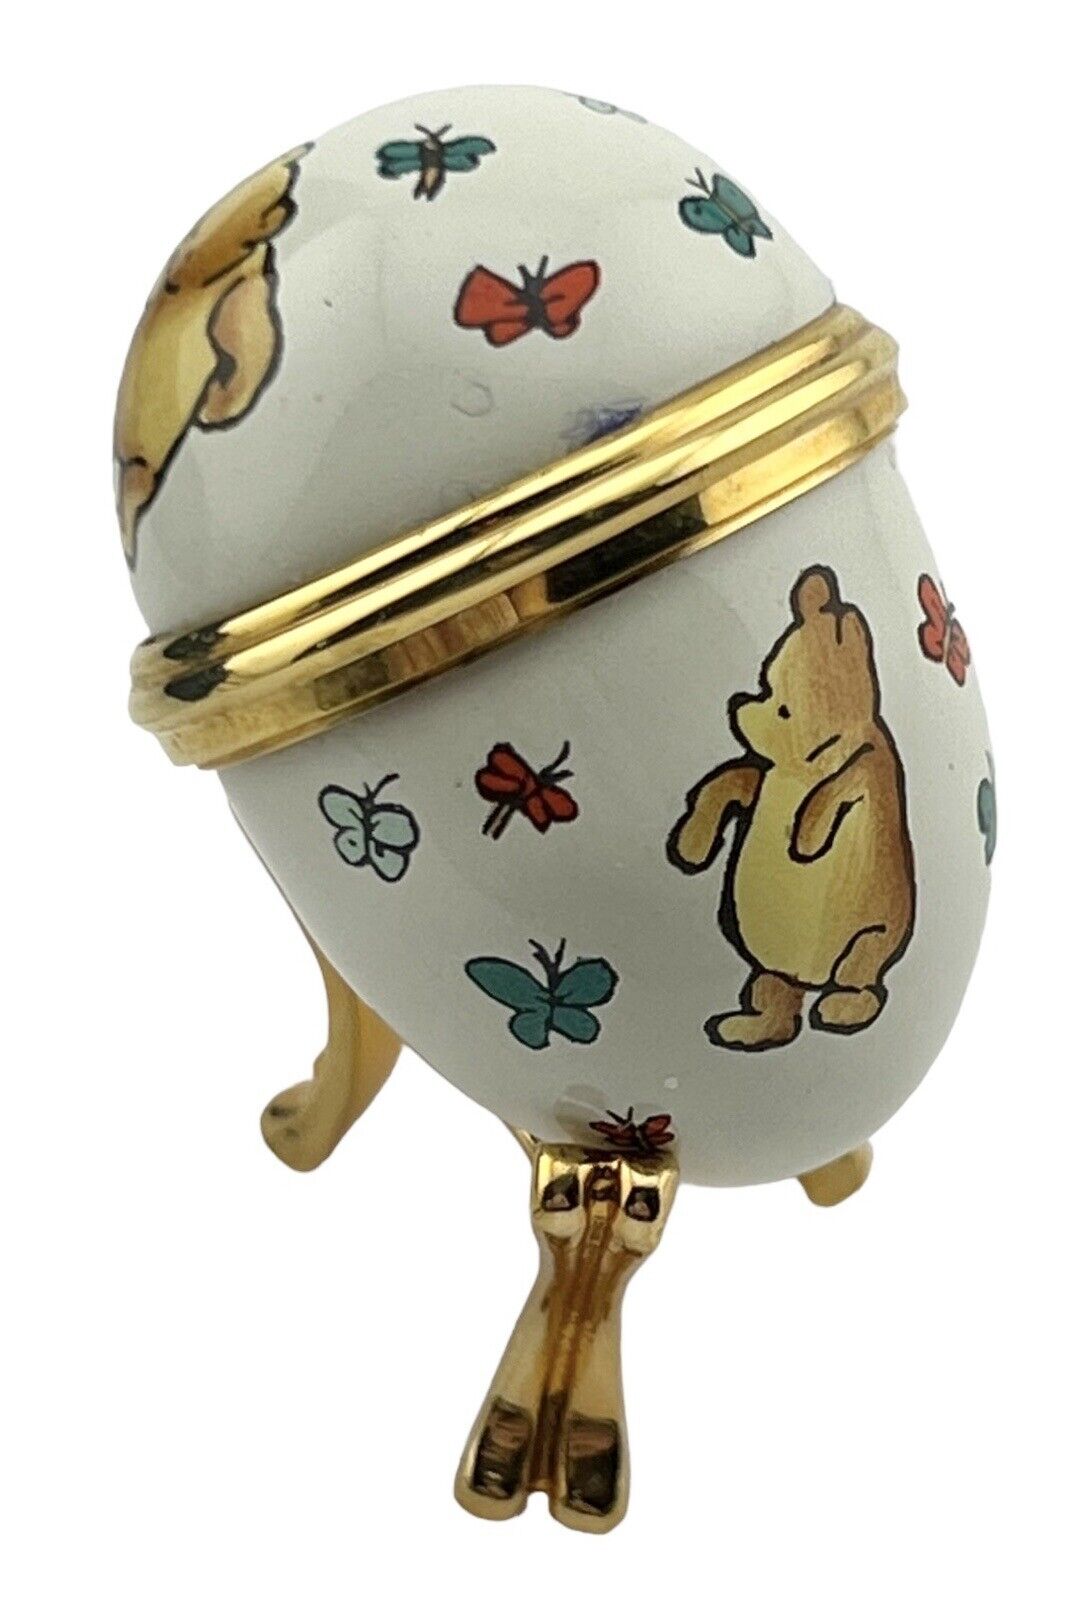 Rare Halcyon Days Enamels Winnie the Pooh Egg Shaped Box Disney Classic In Box